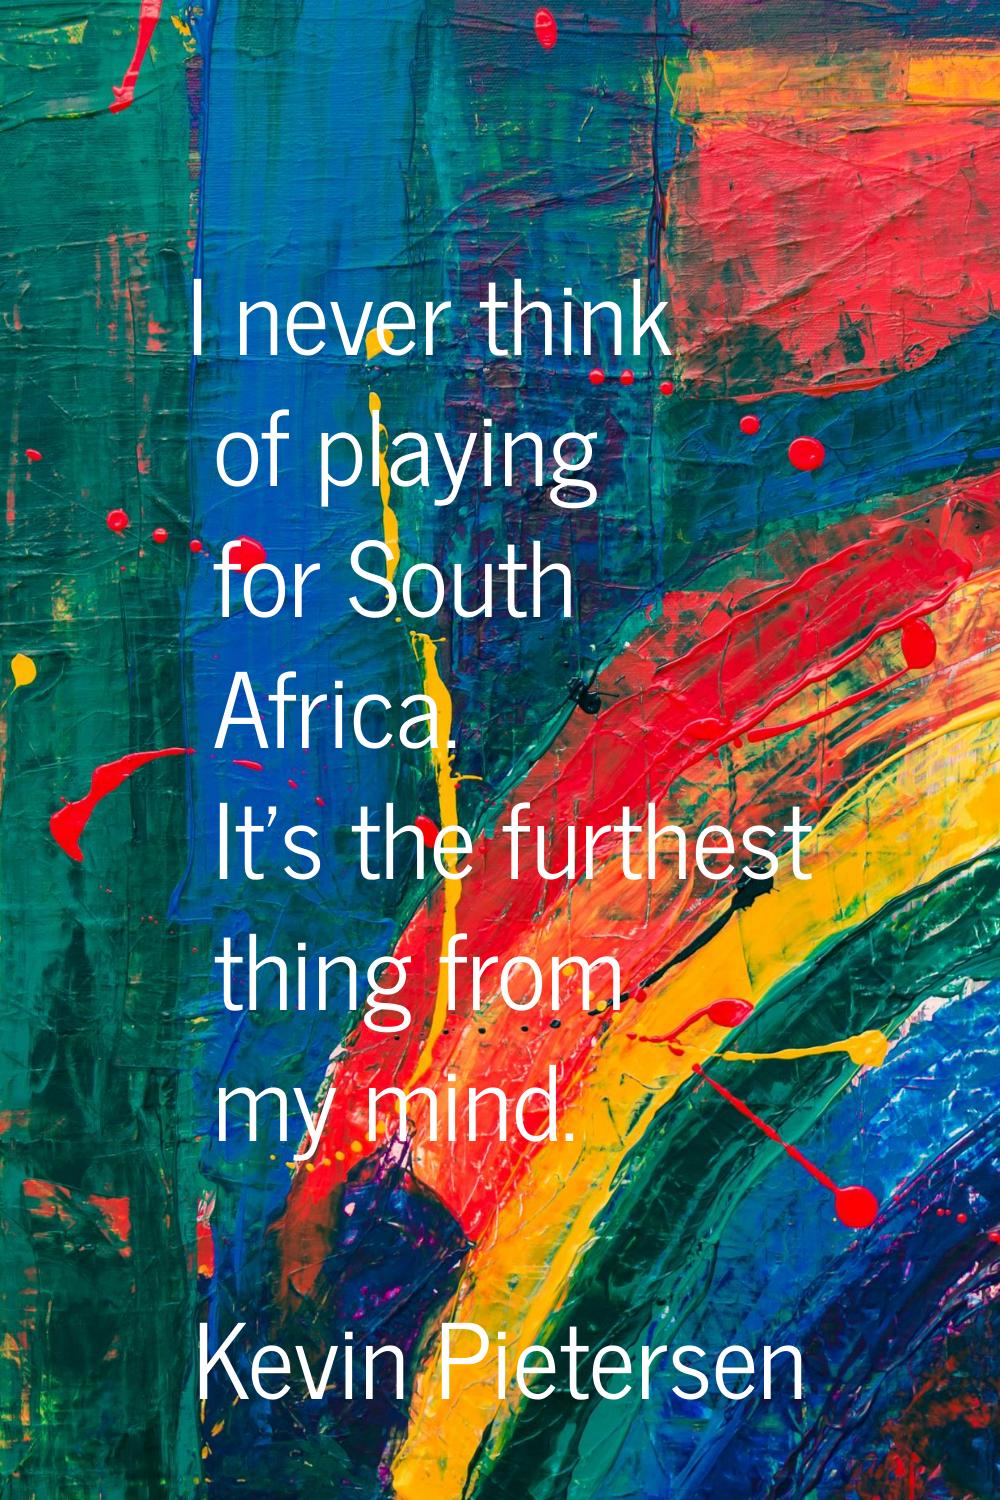 I never think of playing for South Africa. It's the furthest thing from my mind.